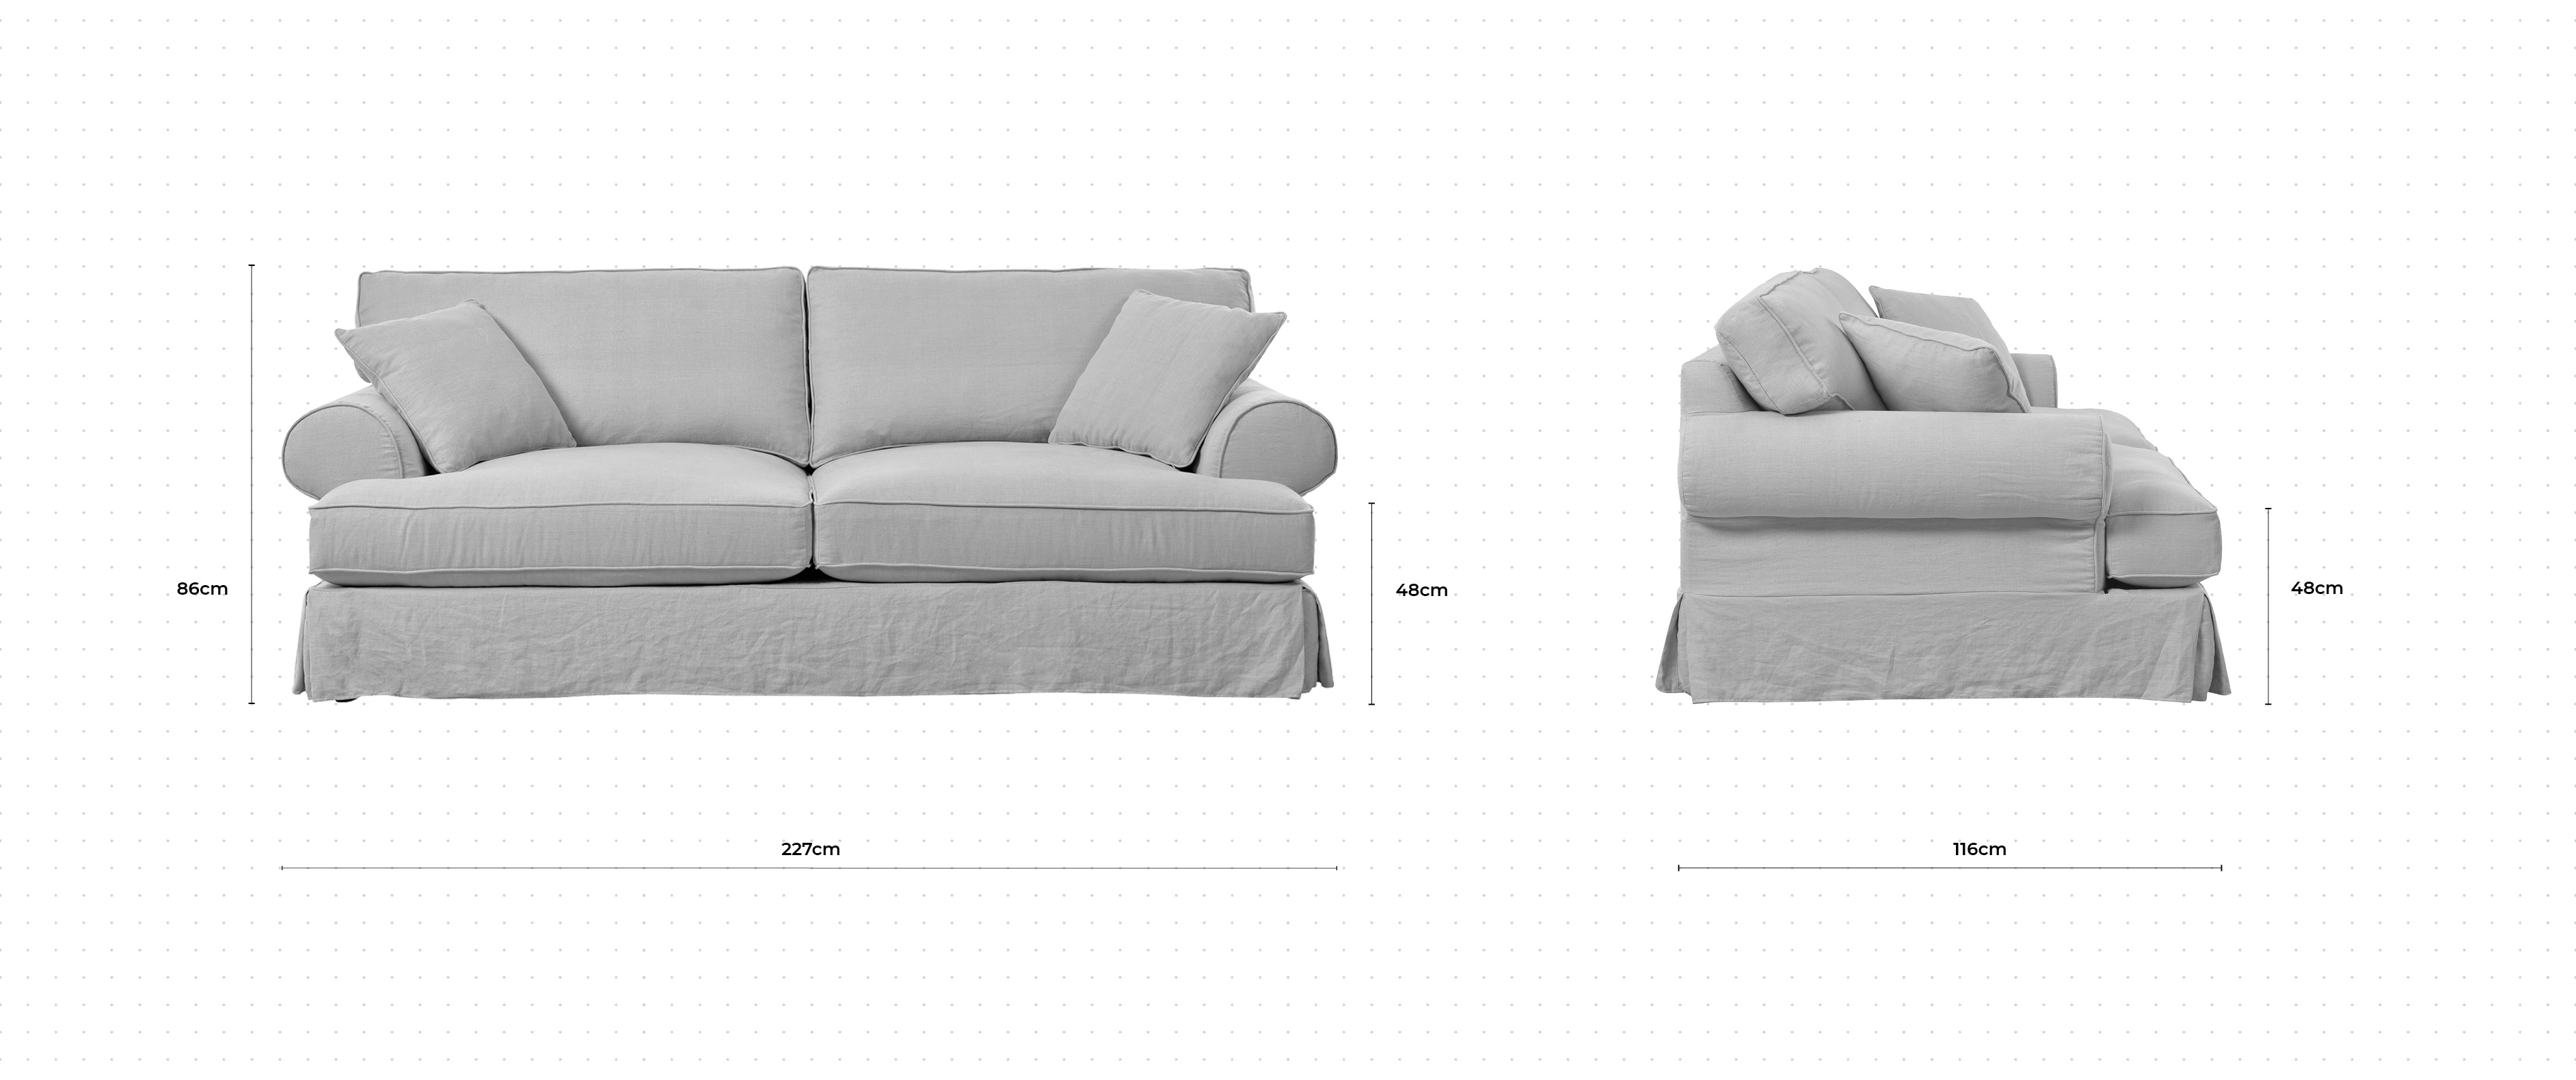 Sands 3 Seater Sofa dimensions